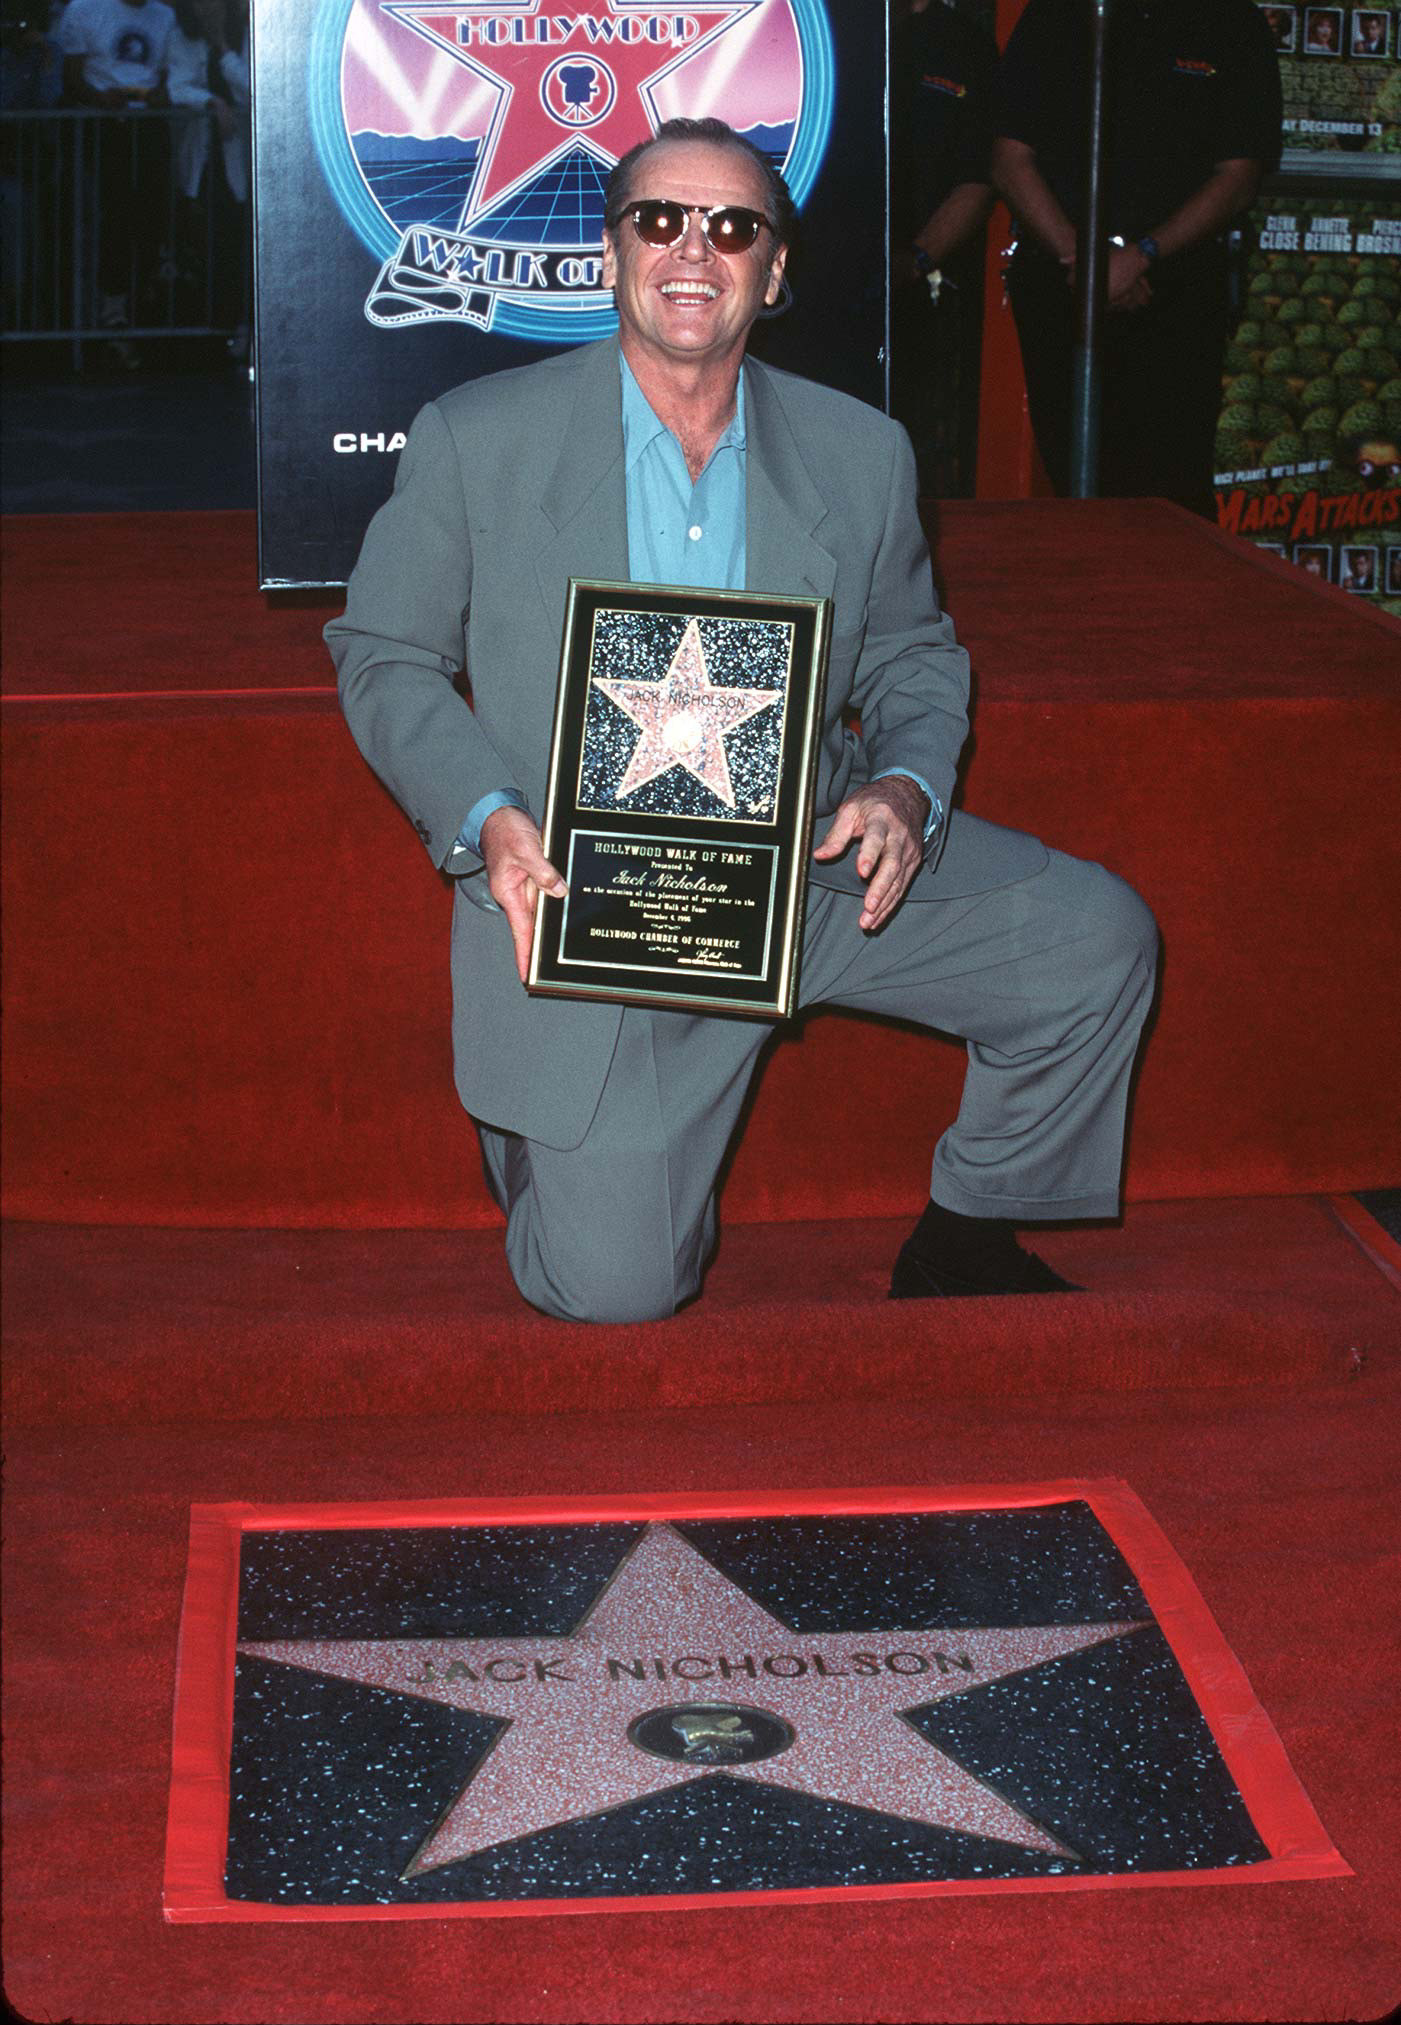 Nicholson with his Hollywood star